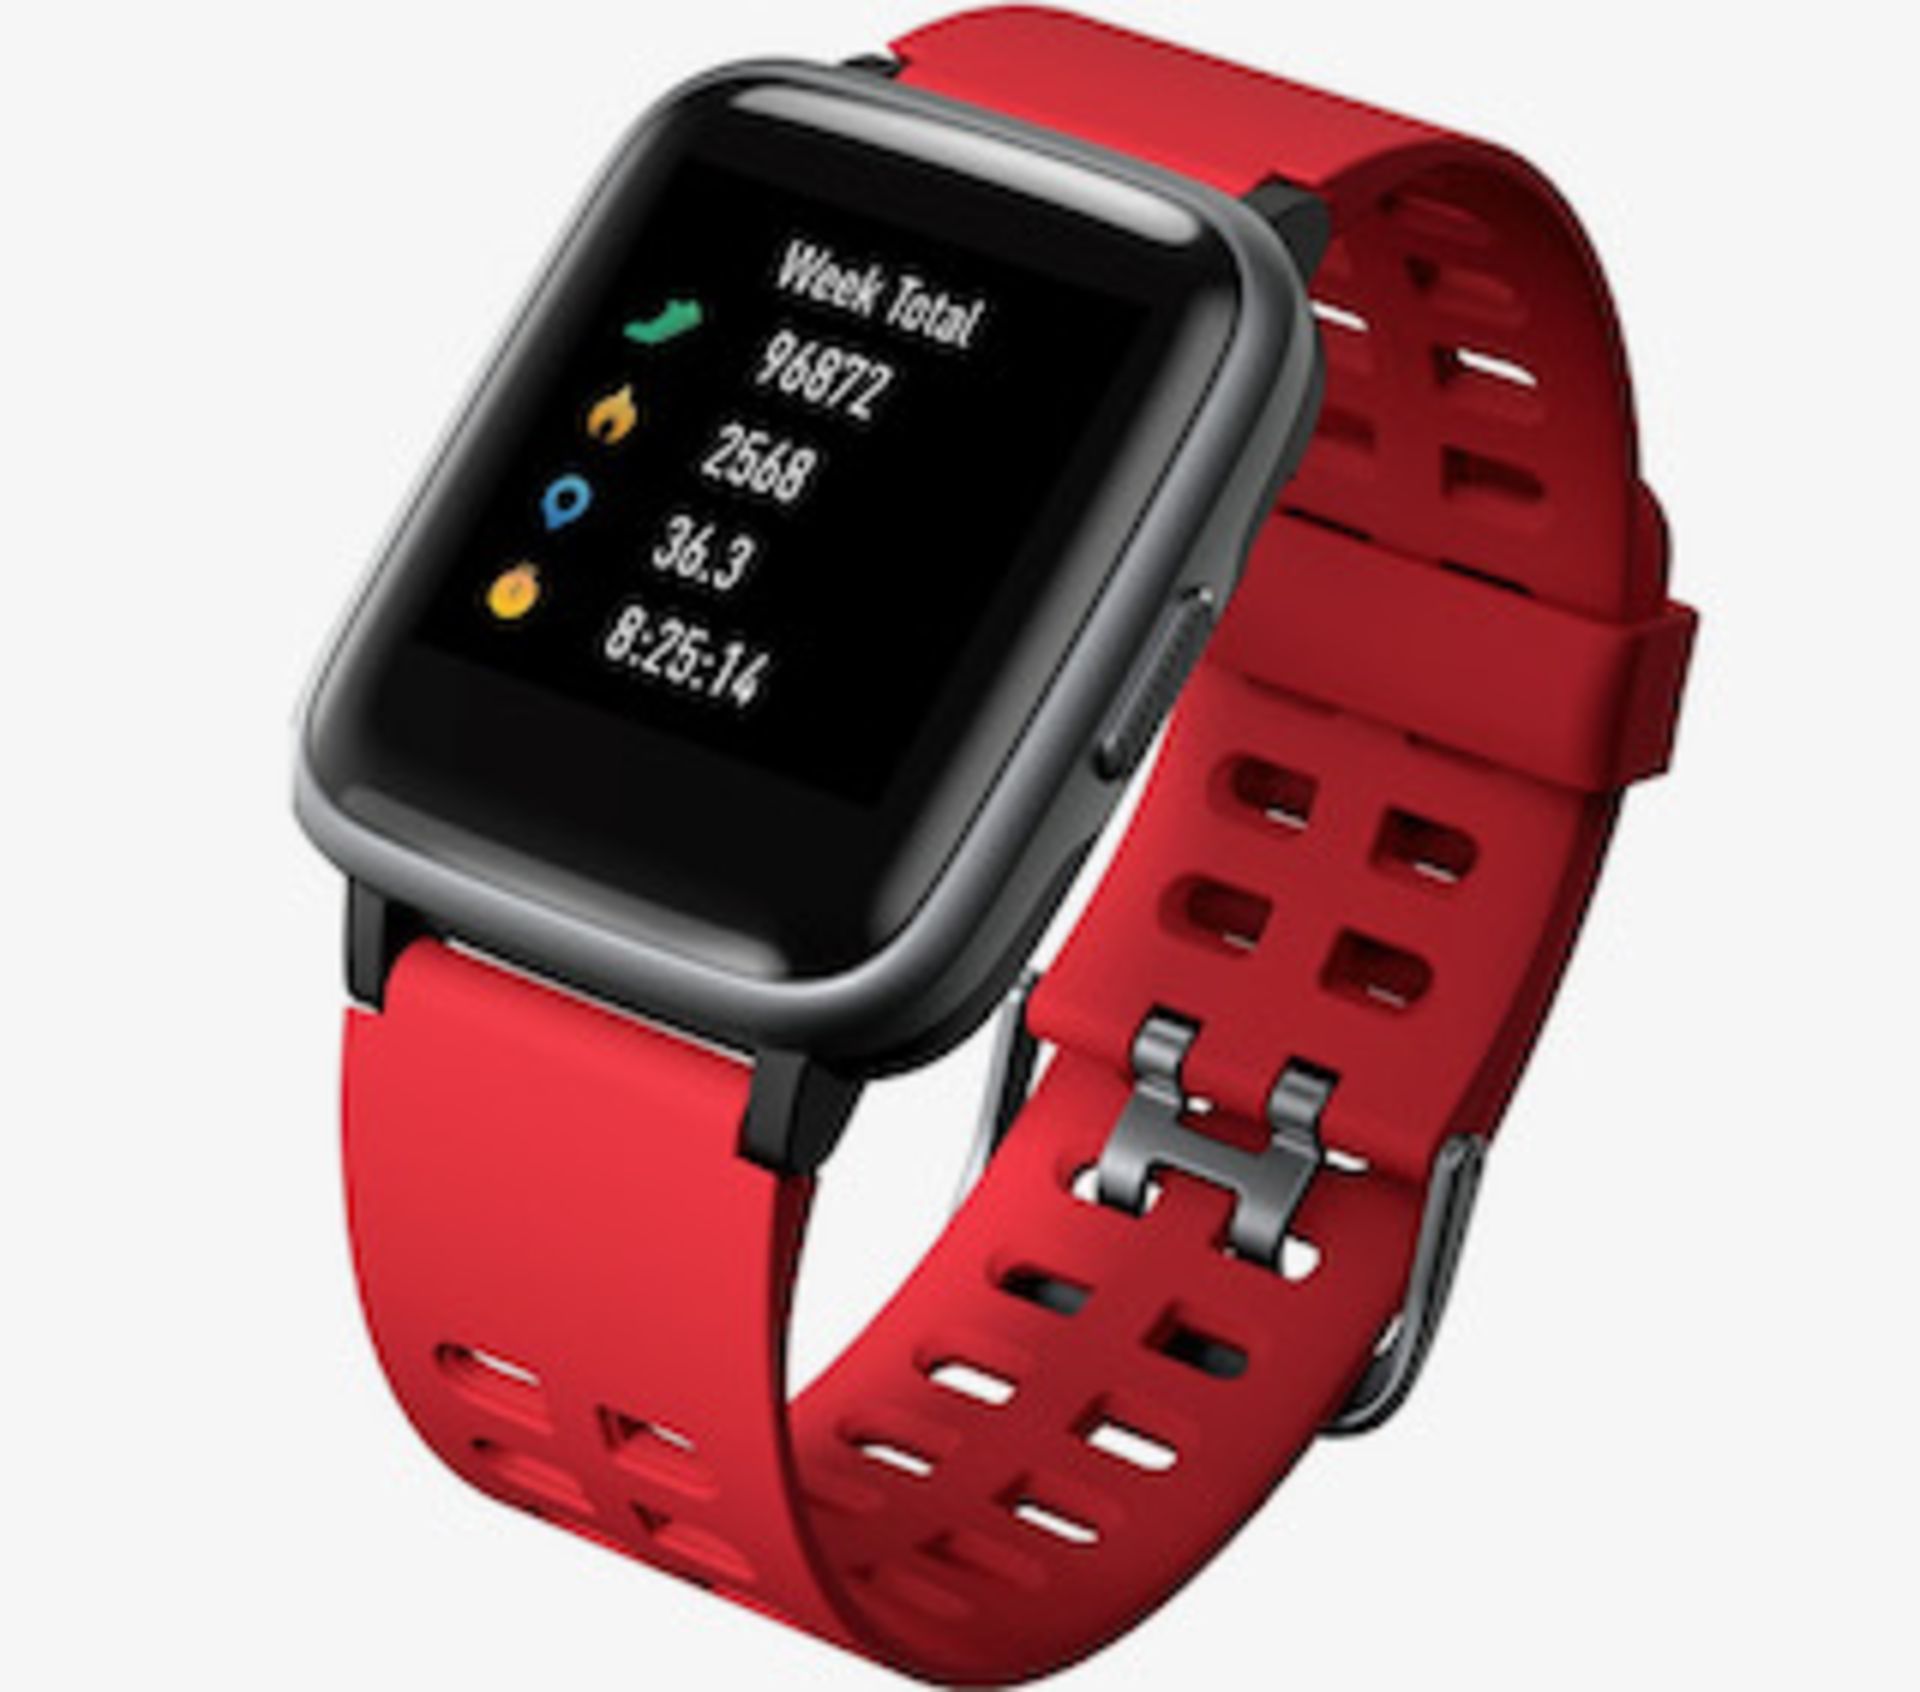 Brand New Unisex Fitness Tracker Watch Id205 Red Strap About This Item 1.3-Inch LCD Colour - Image 19 of 34